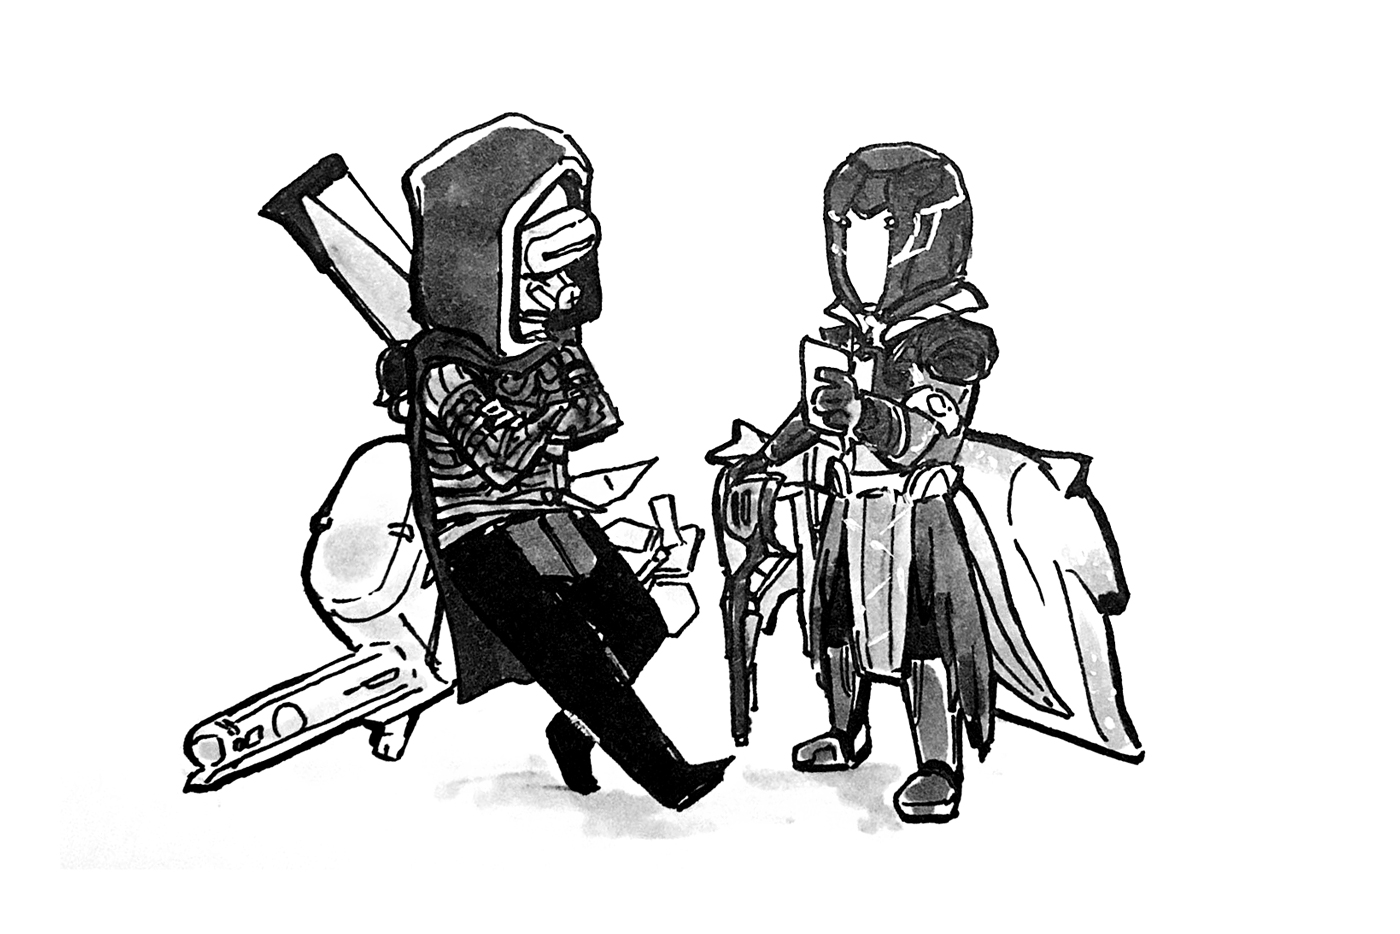 Cartoony hunter and warlock looking up directions on their phone.